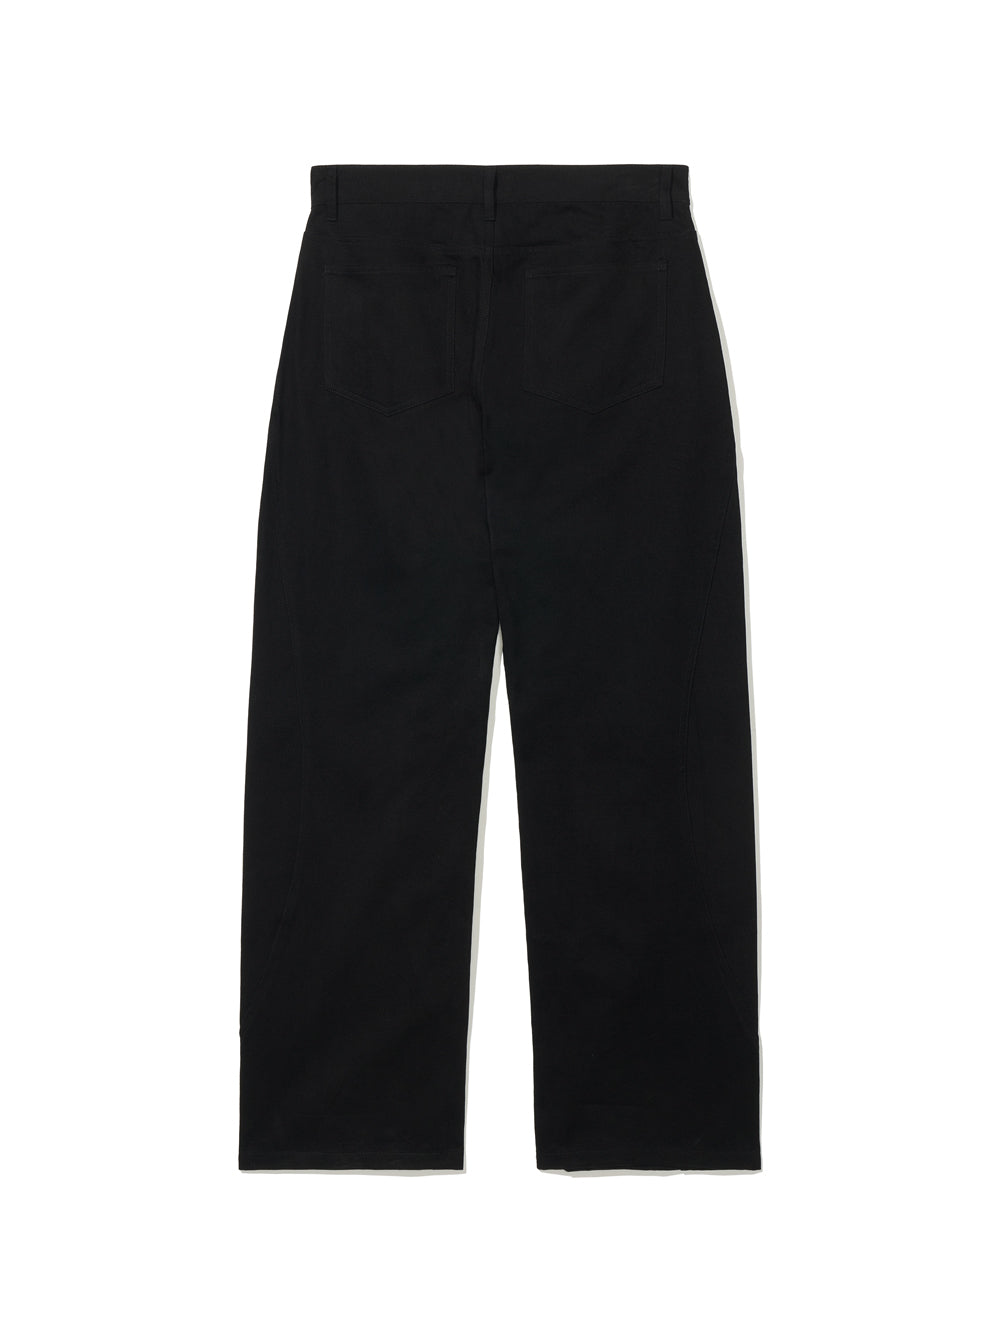 Curved Section Wide Chino Pants in Black